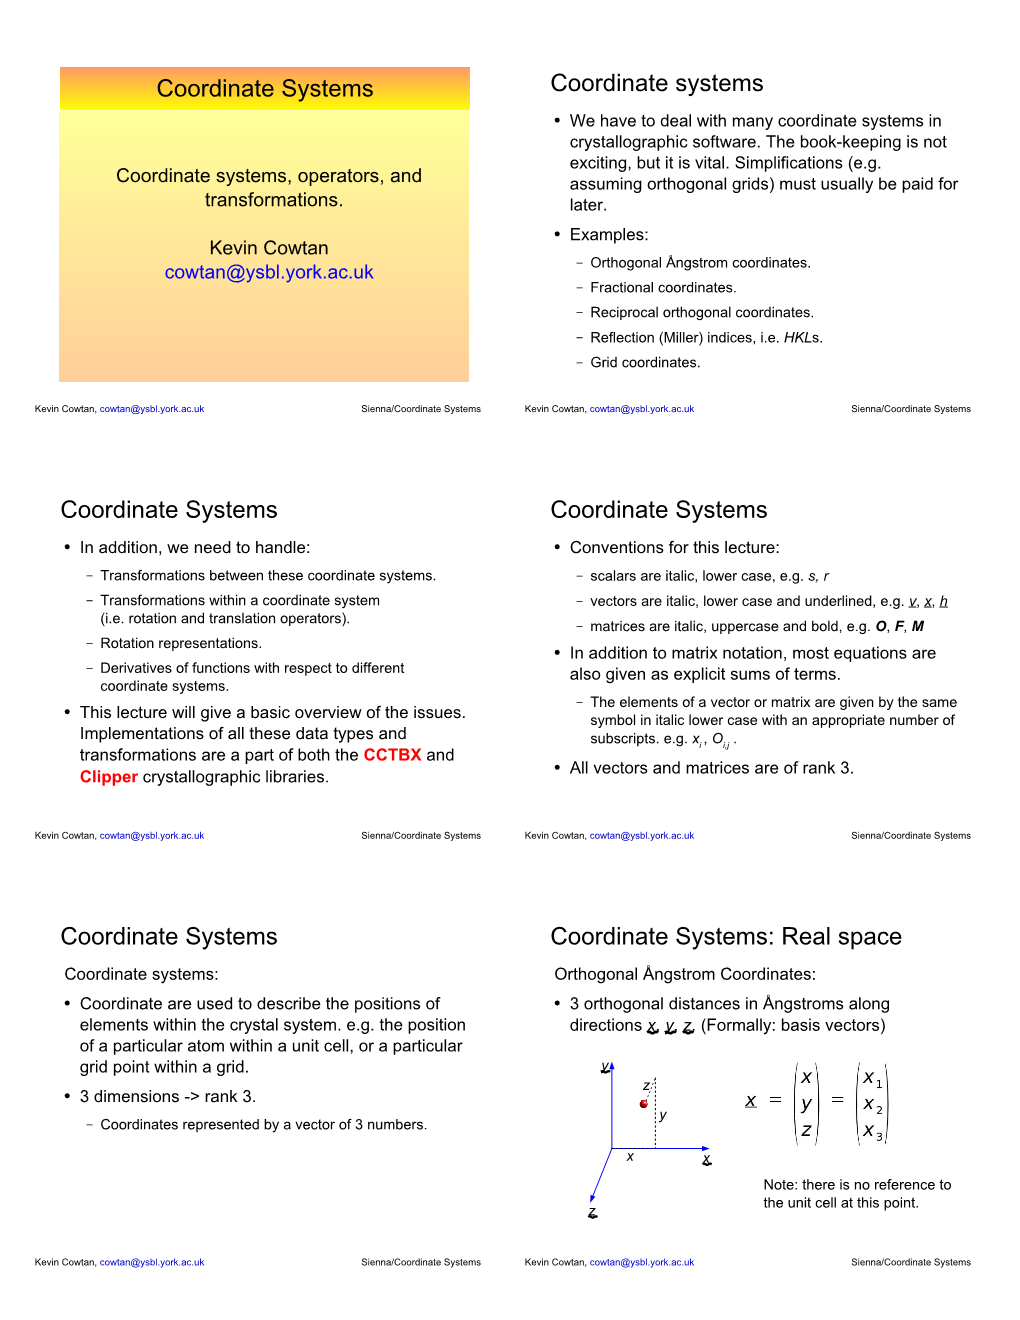 Coordinate Systems, Operators, and Transformations